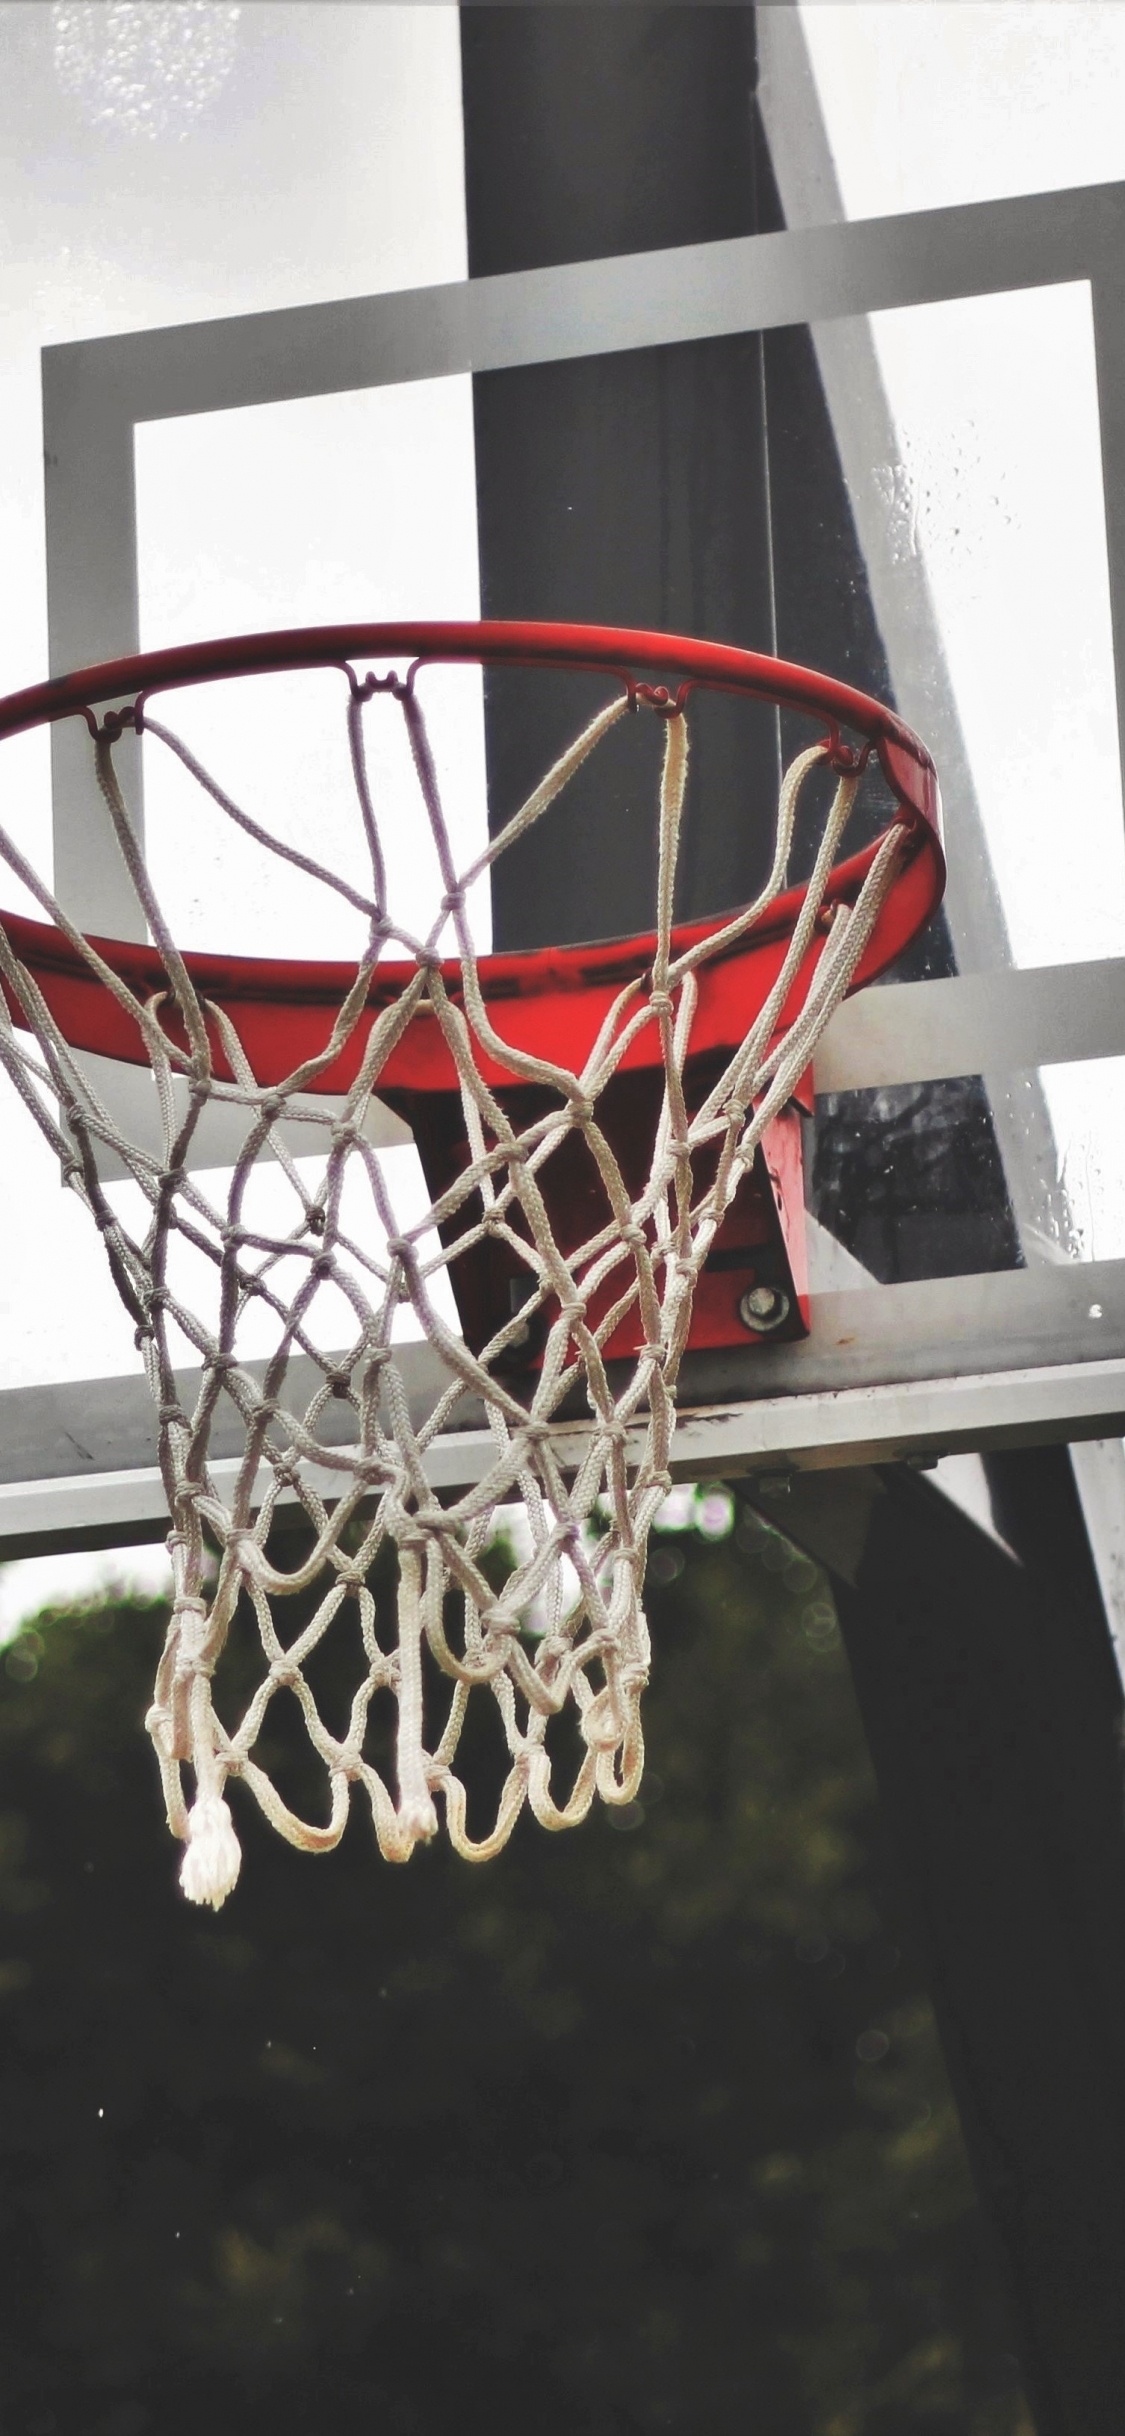 Black and Red Basketball Hoop. Wallpaper in 1125x2436 Resolution